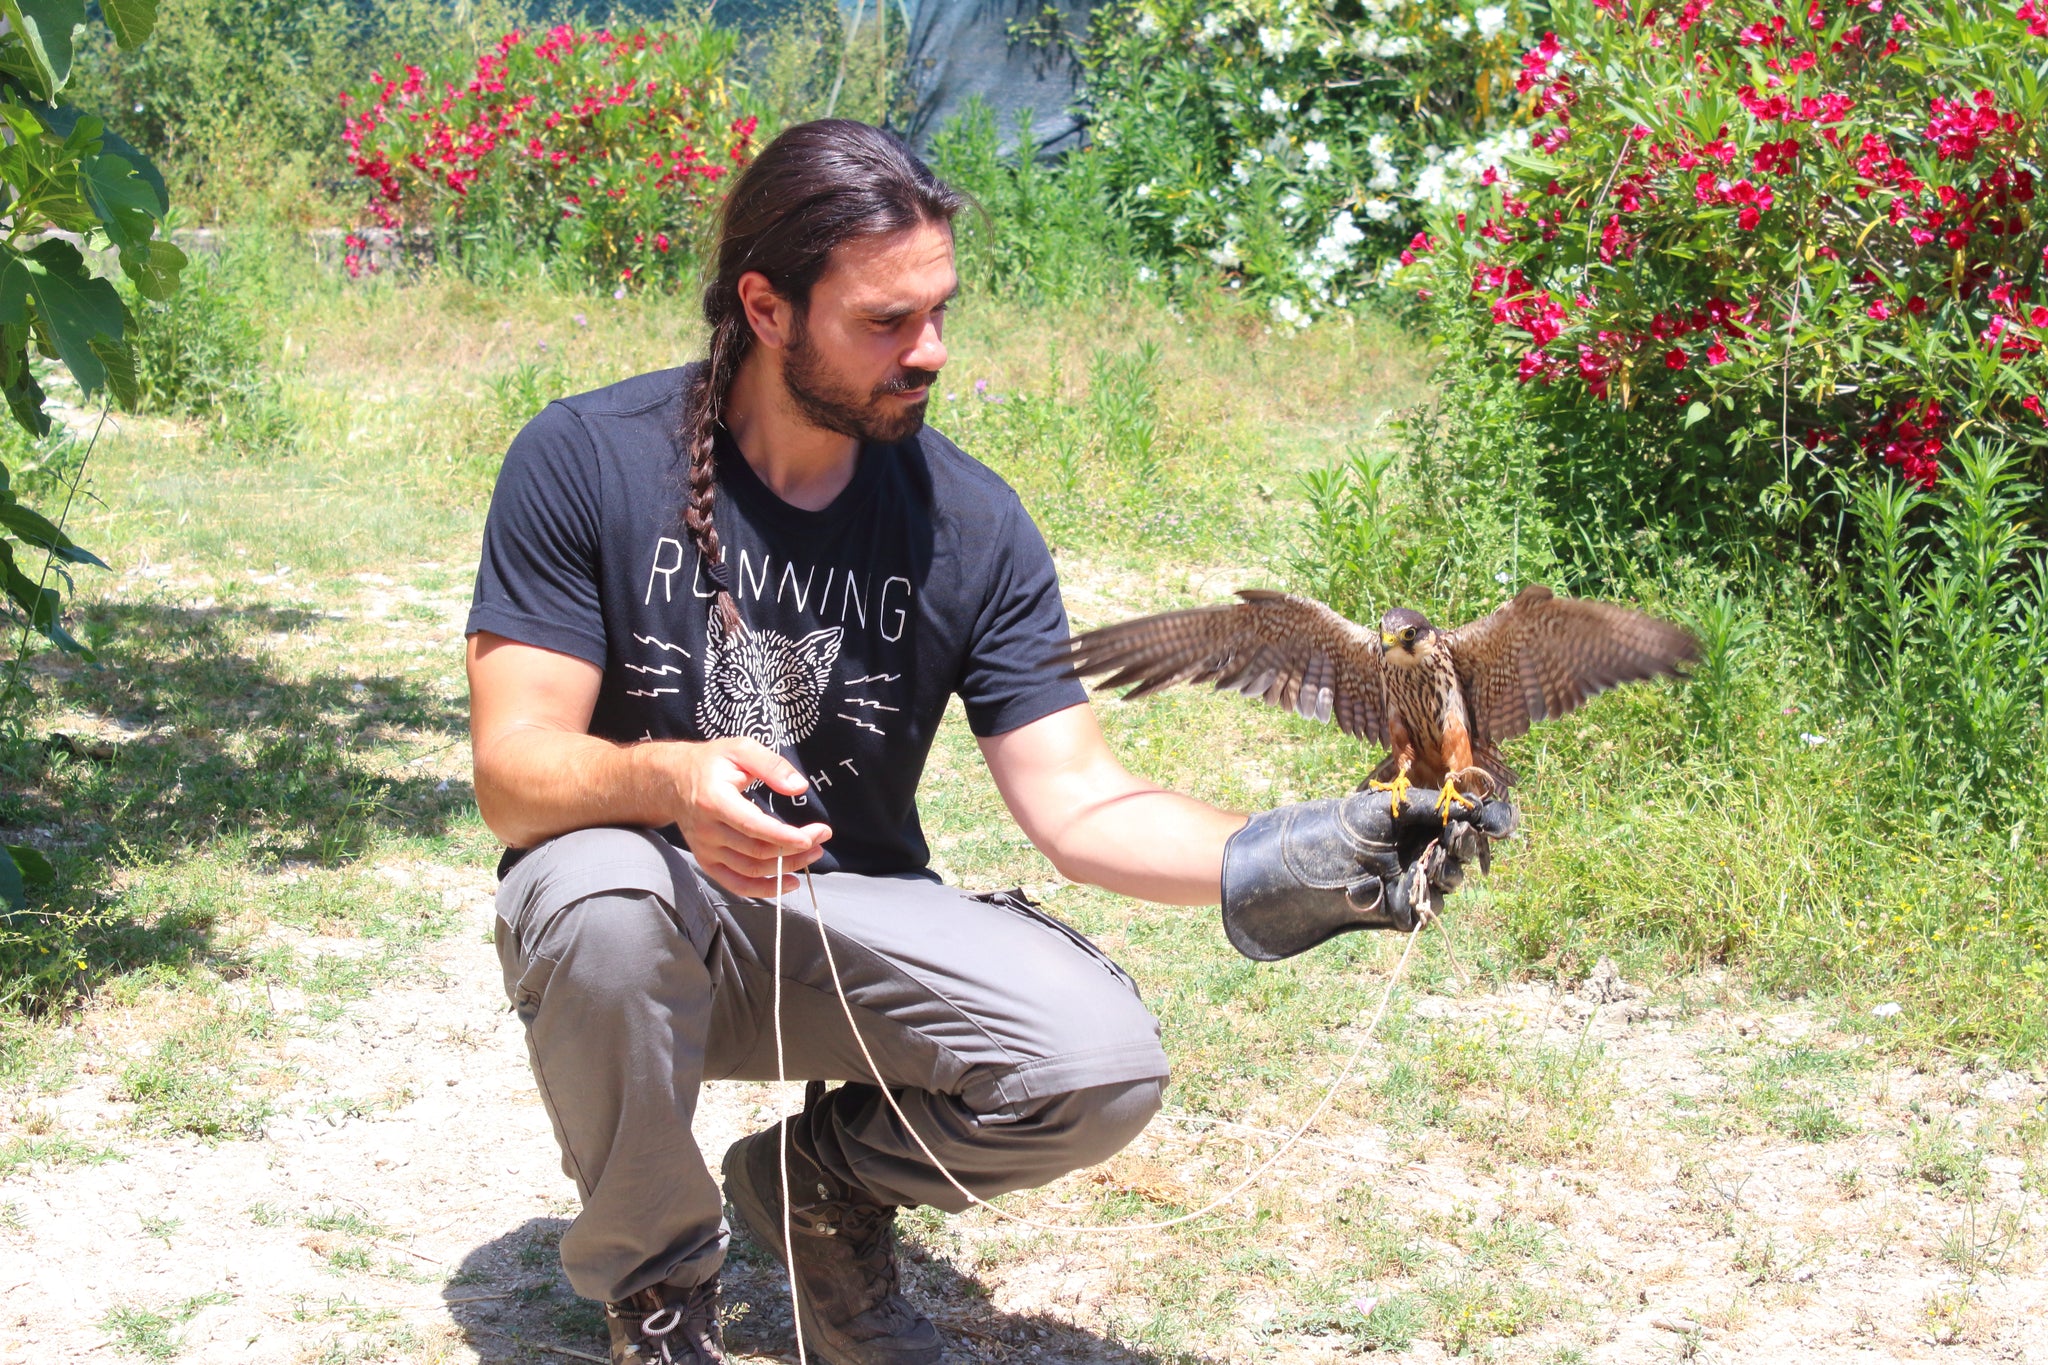 Modern Technologies Applied to Falconry & Reintroduction: the first high-tech training program for birds of prey